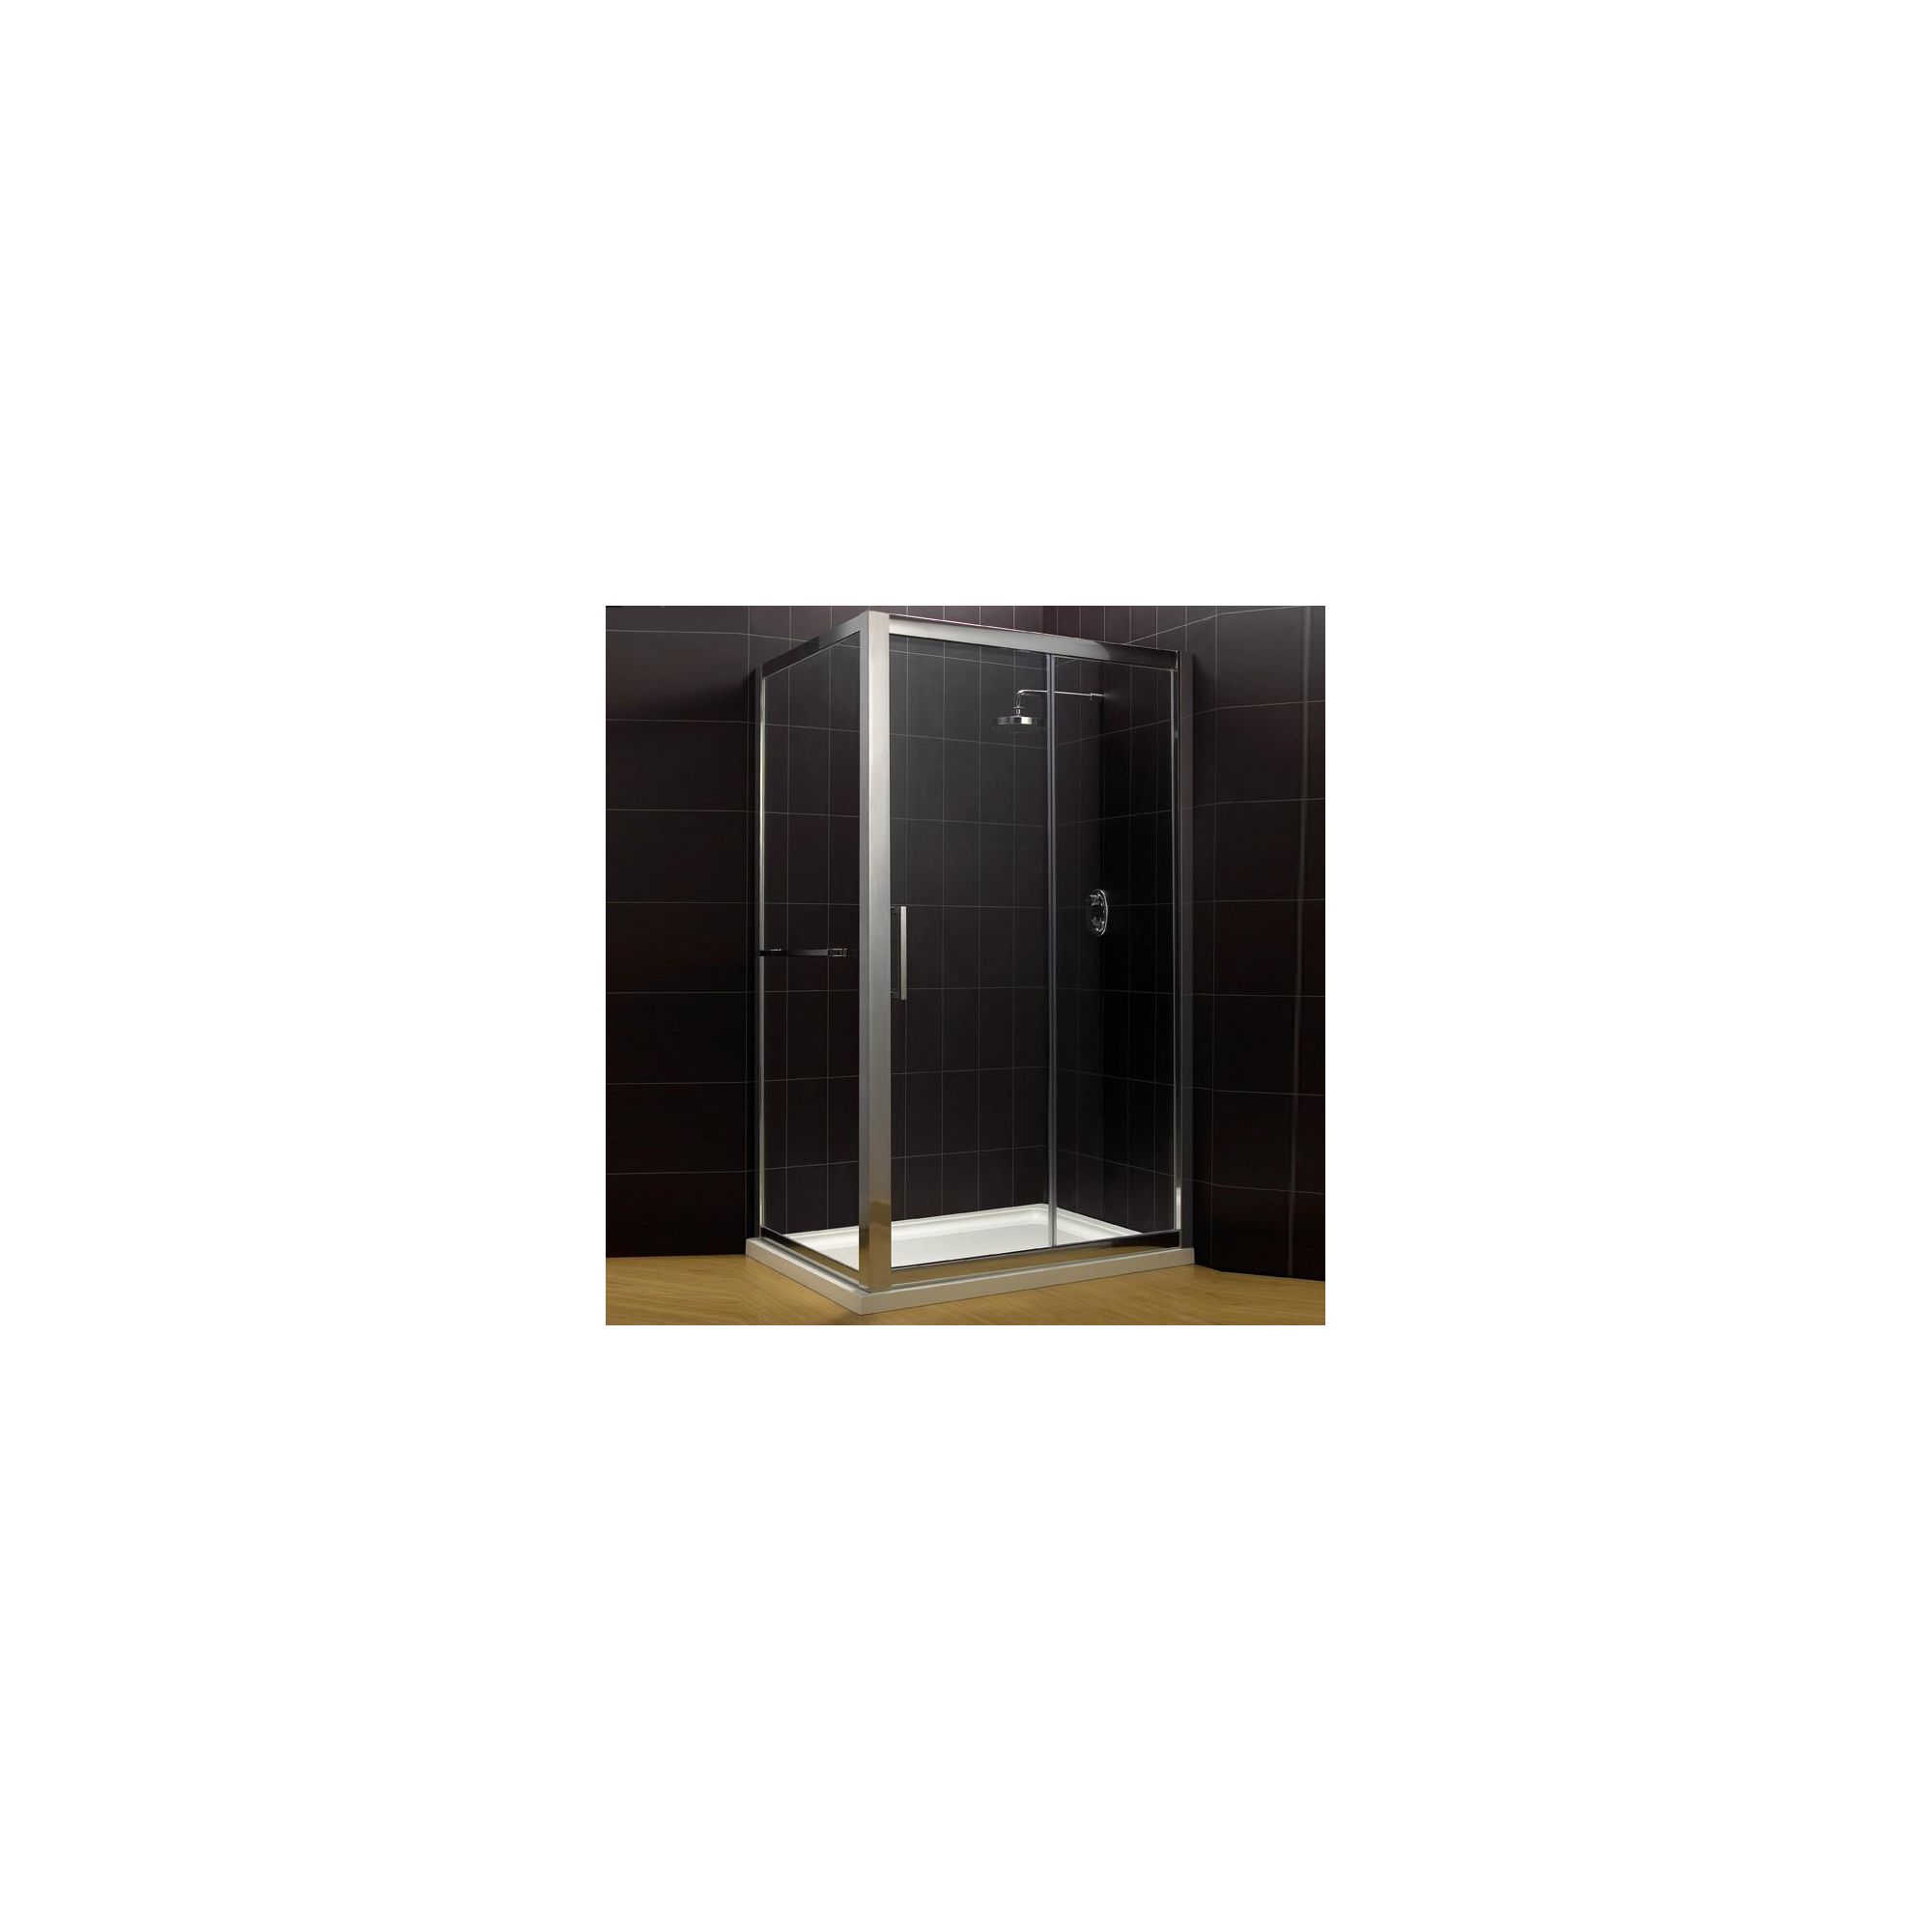 Duchy Supreme Silver Sliding Door Shower Enclosure, 1700mm x 760mm, Standard Tray, 8mm Glass at Tesco Direct